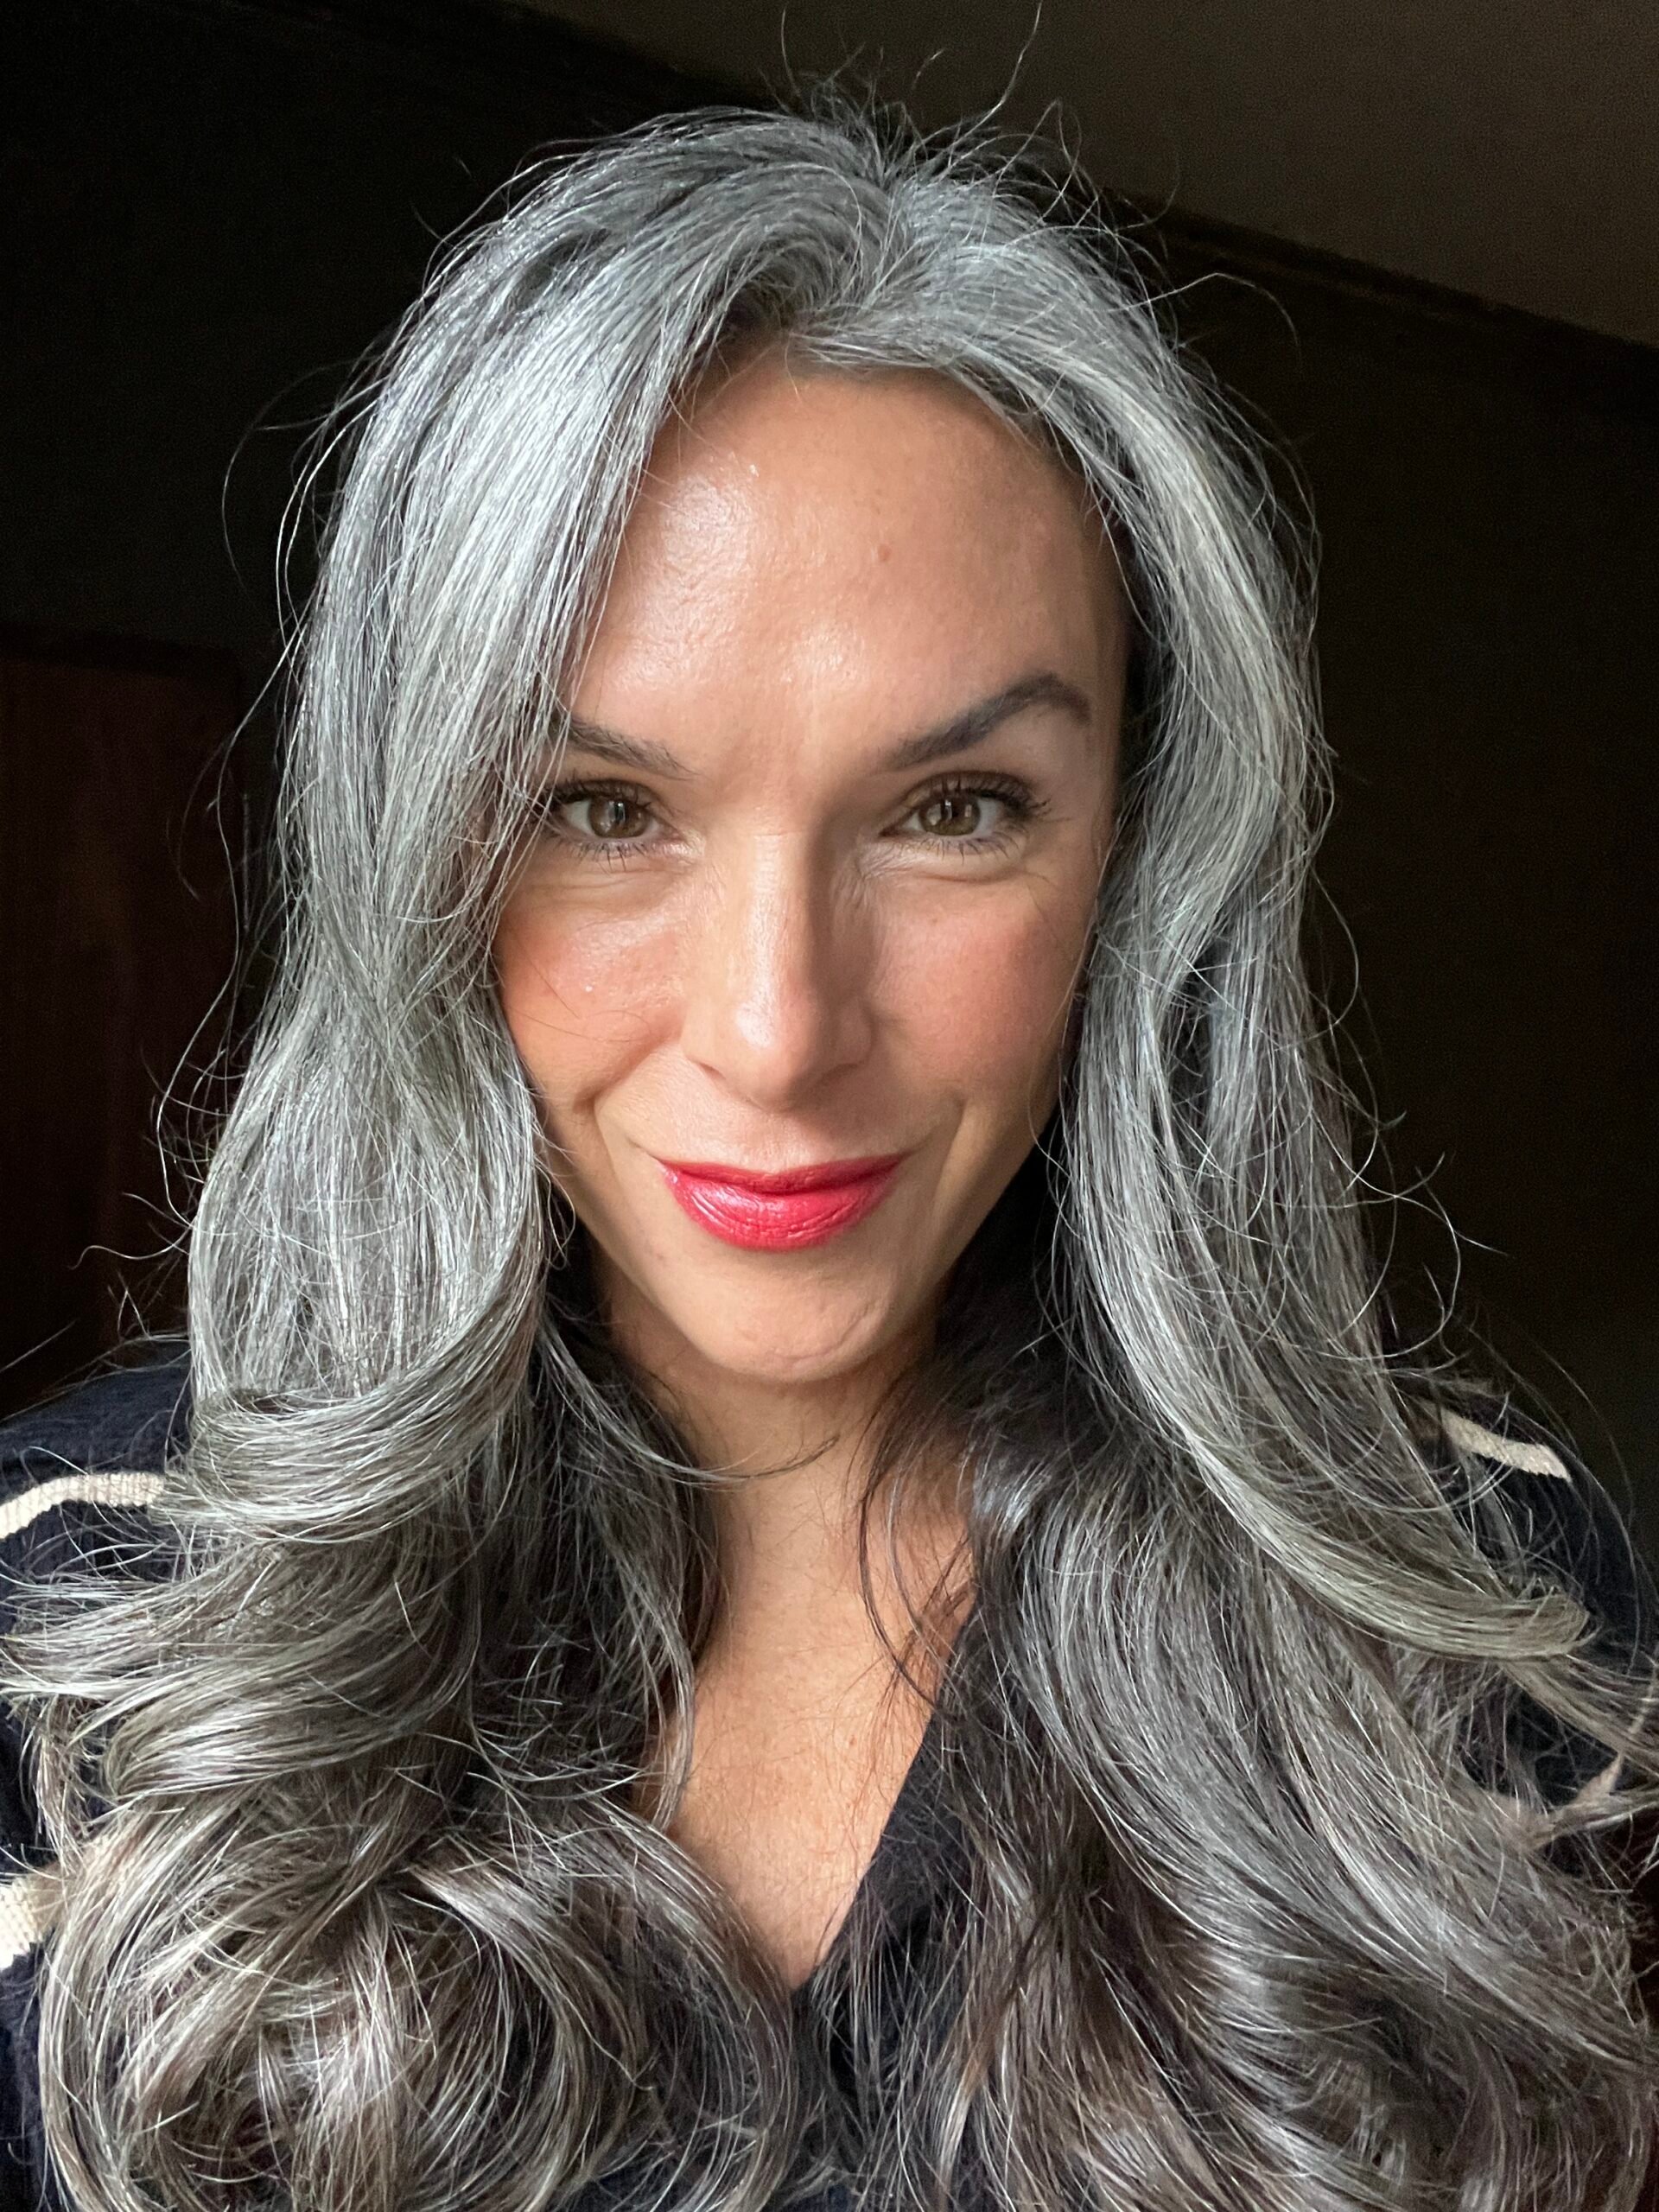 A woman with long gray hair and red lipstick